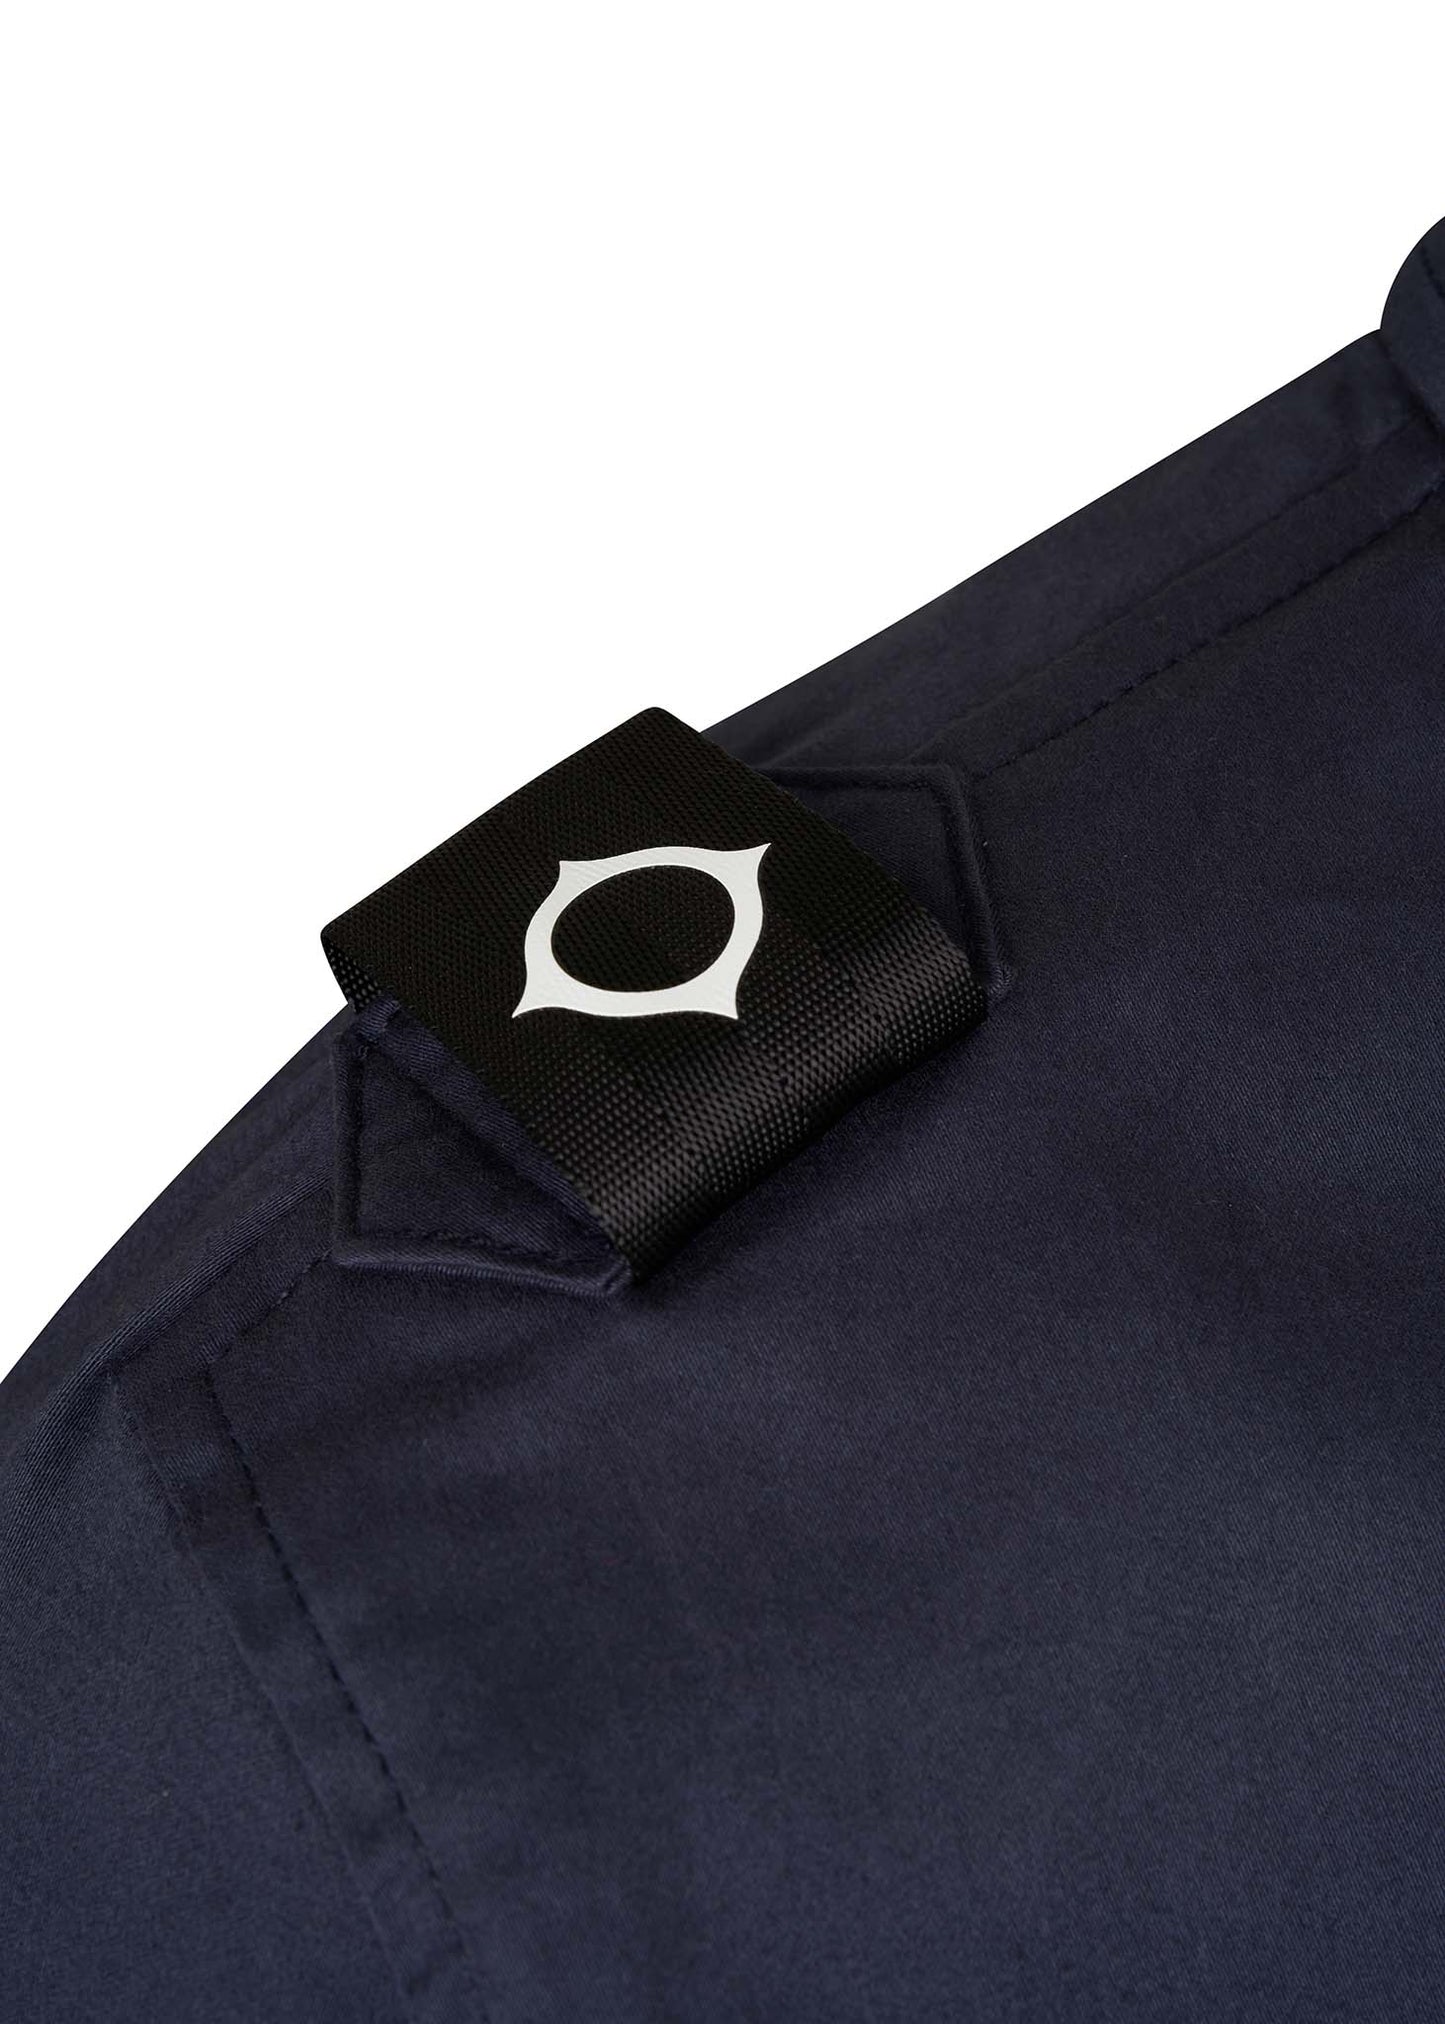 DH two pocket overshirt - ink navy